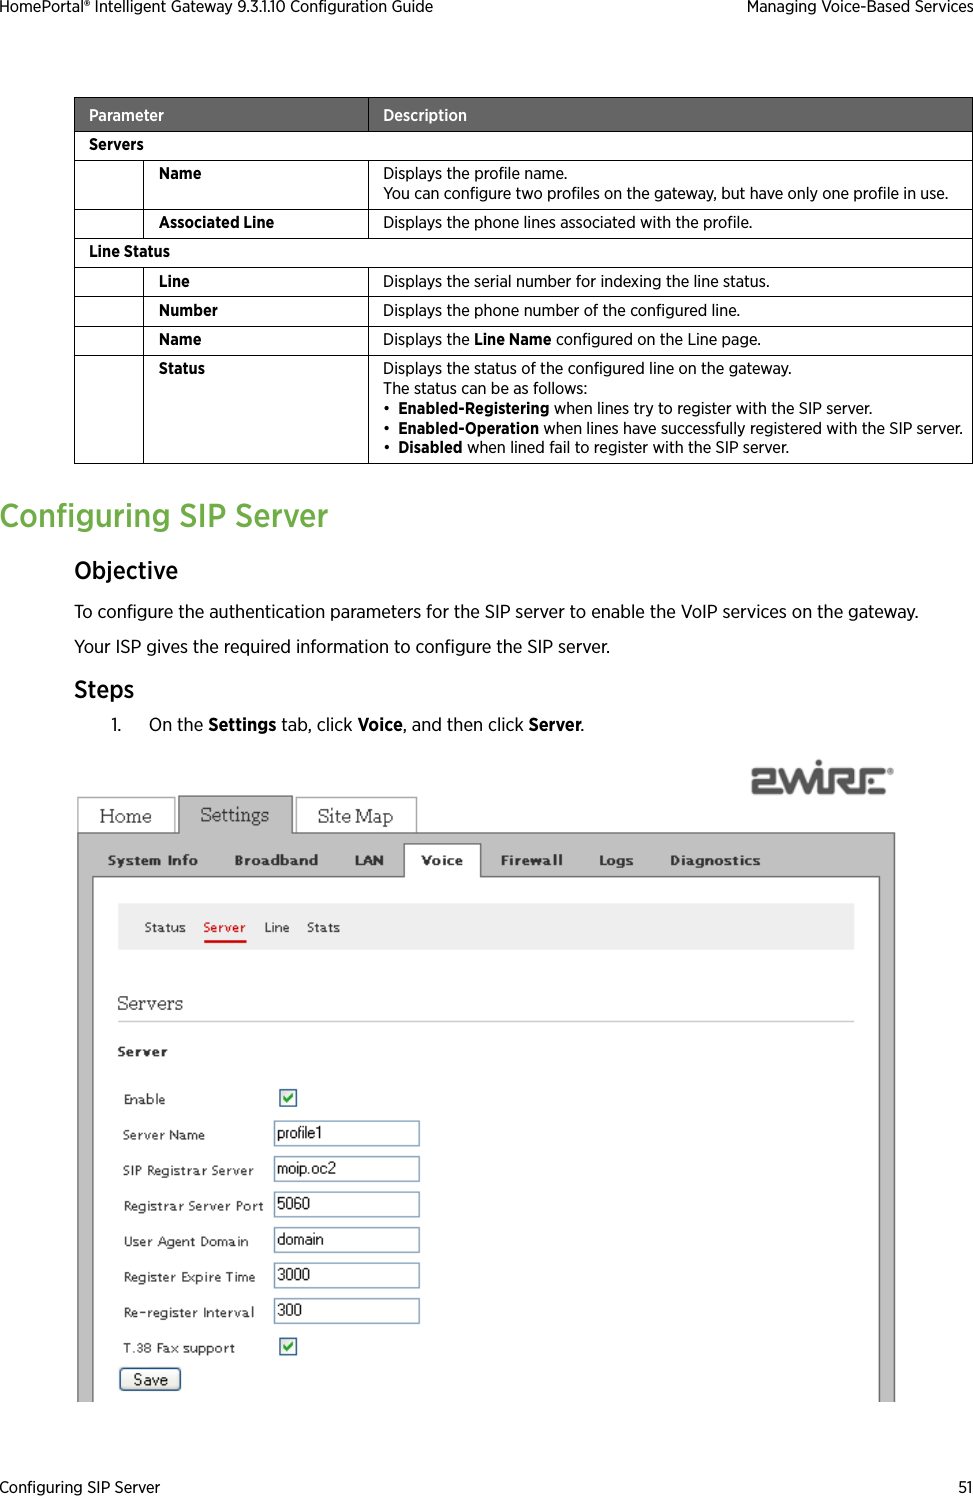 Configuring SIP Server 51HomePortal® Intelligent Gateway 9.3.1.10 Configuration Guide Managing Voice-Based ServicesConfiguring SIP ServerObjectiveTo configure the authentication parameters for the SIP server to enable the VoIP services on the gateway.Your ISP gives the required information to configure the SIP server.Steps1. On the Settings tab, click Voice, and then click Server.Parameter DescriptionServersName Displays the profile name. You can configure two profiles on the gateway, but have only one profile in use.Associated Line Displays the phone lines associated with the profile.Line StatusLine Displays the serial number for indexing the line status.Number Displays the phone number of the configured line.Name Displays the Line Name configured on the Line page.Status Displays the status of the configured line on the gateway. The status can be as follows:•Enabled-Registering when lines try to register with the SIP server.•Enabled-Operation when lines have successfully registered with the SIP server.•Disabled when lined fail to register with the SIP server.